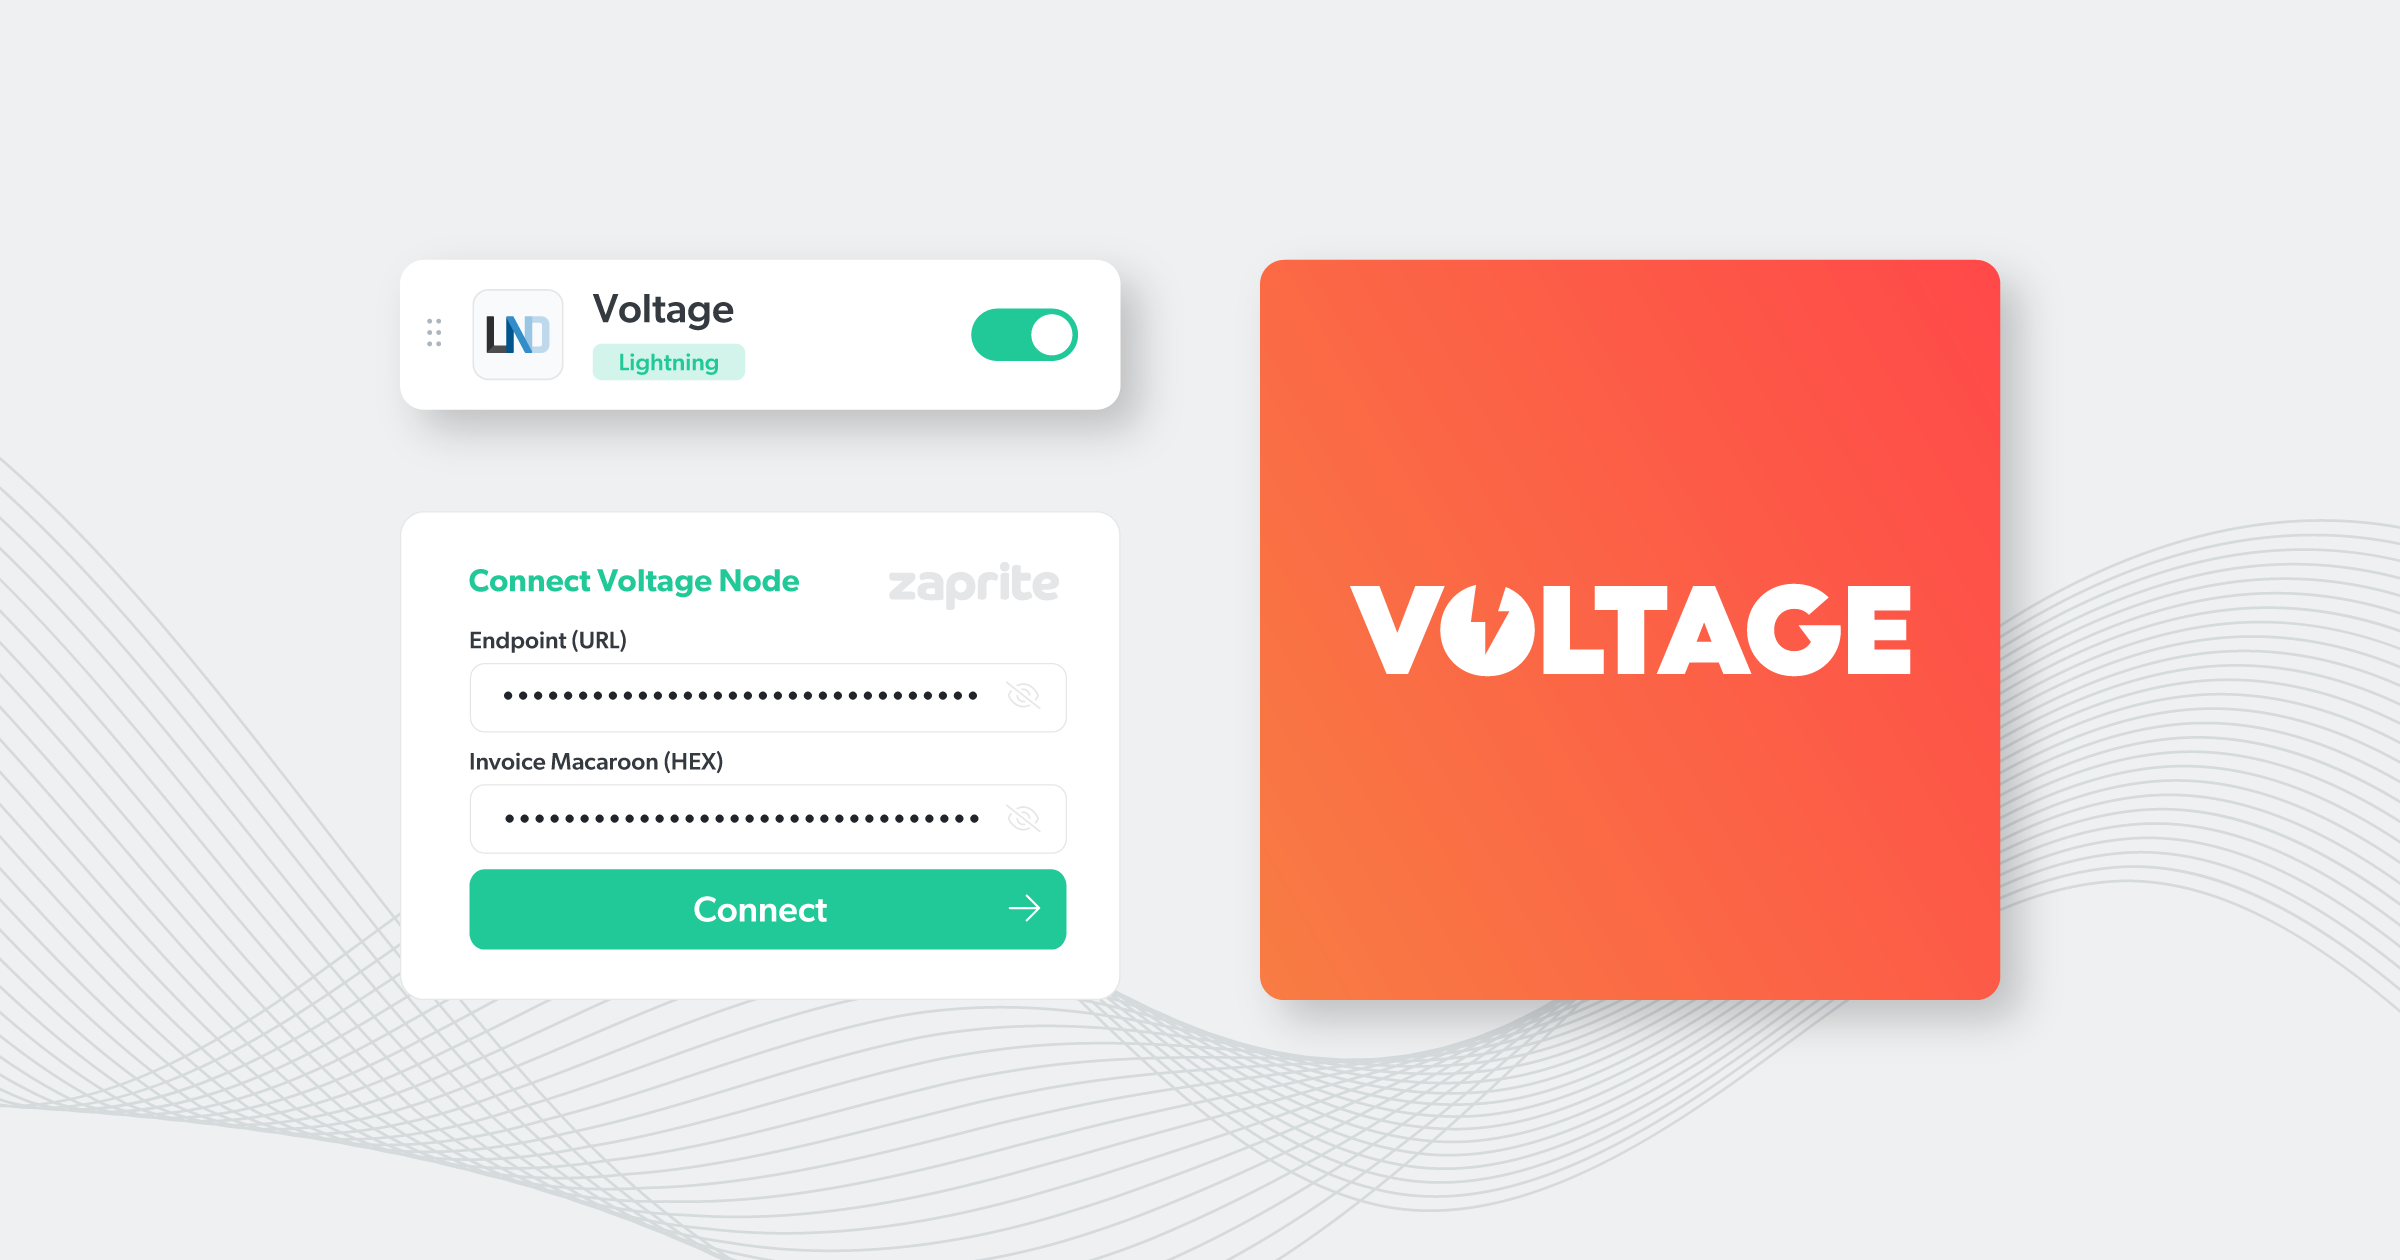 How to Connect A Voltage Account